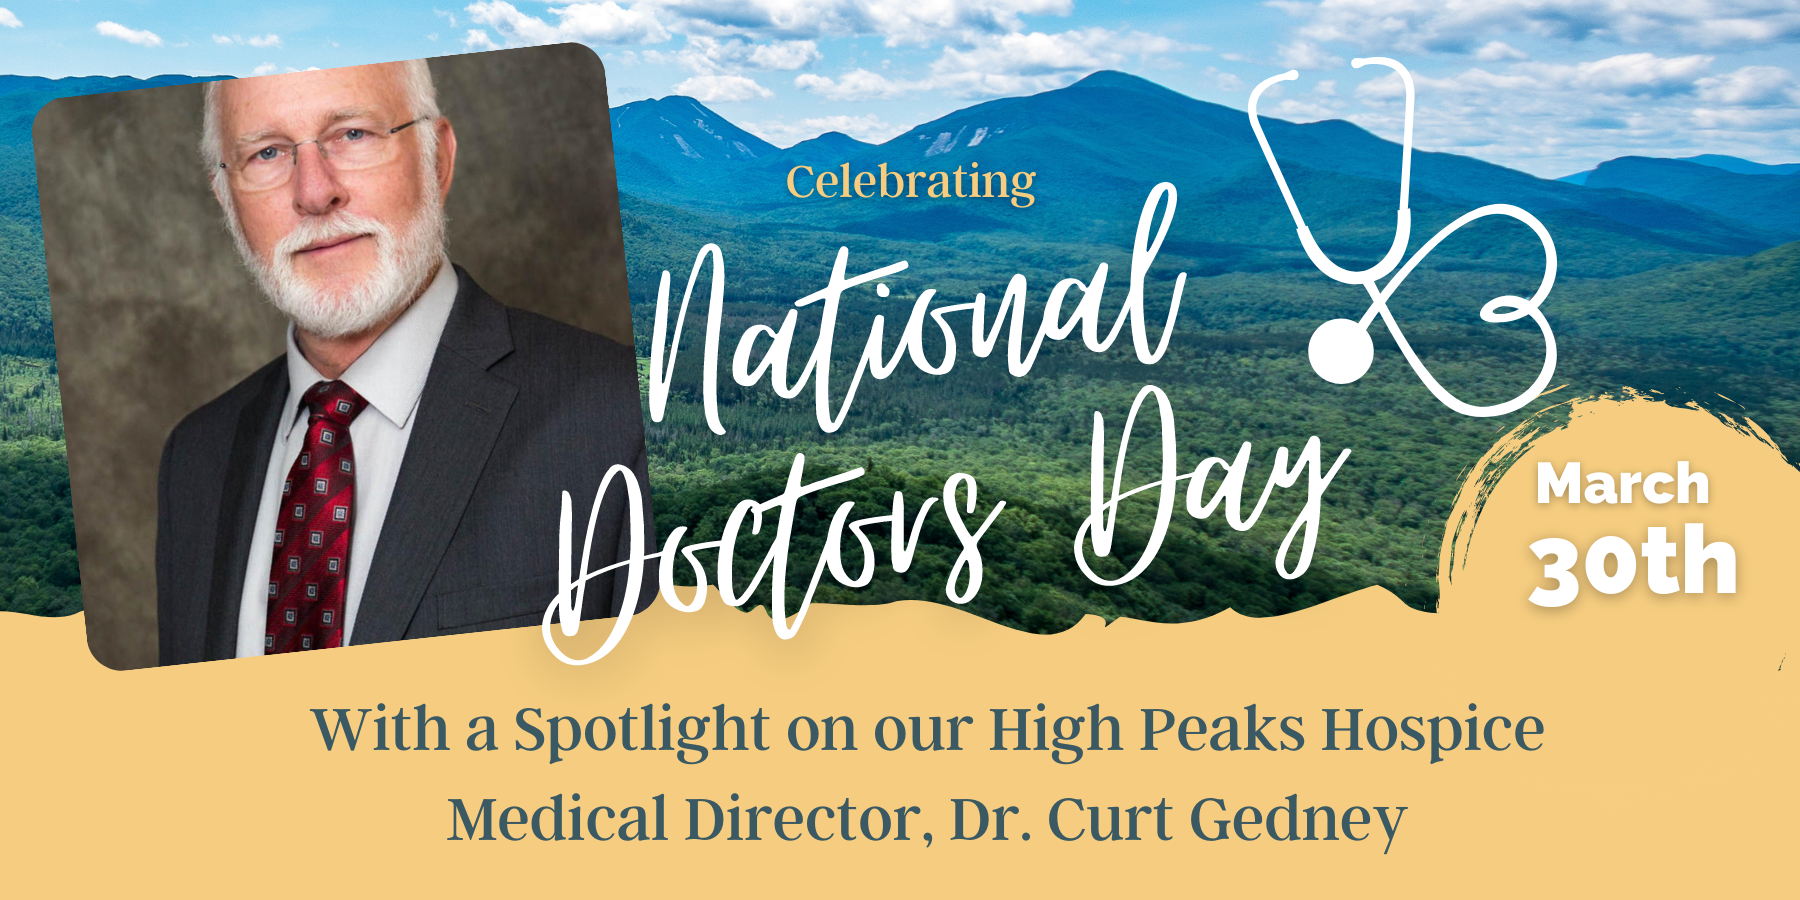 National Doctors' Day